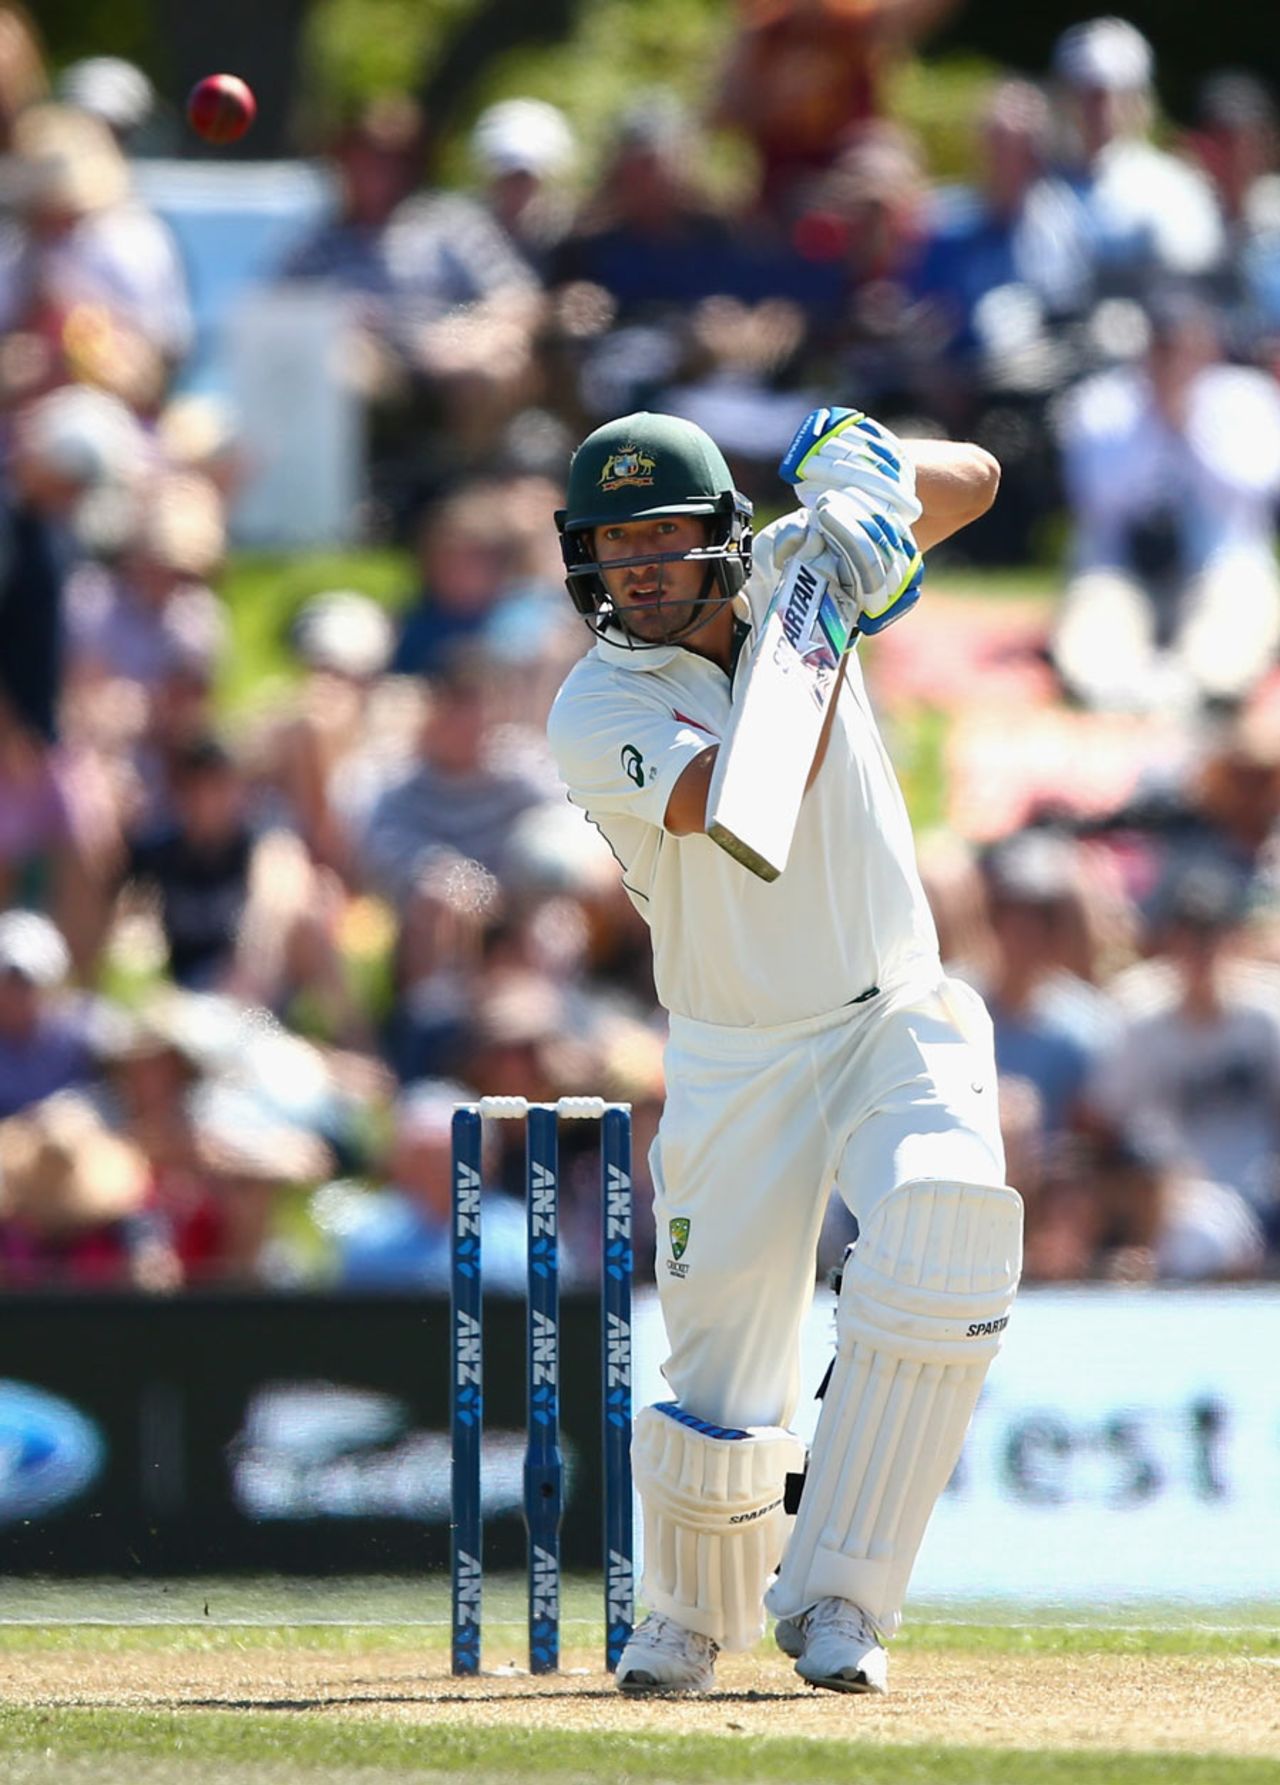 Joe Burns scored a fifty in the morning session, New Zealand v Australia, 2nd Test, Christchurch, 2nd day, February 21, 2016